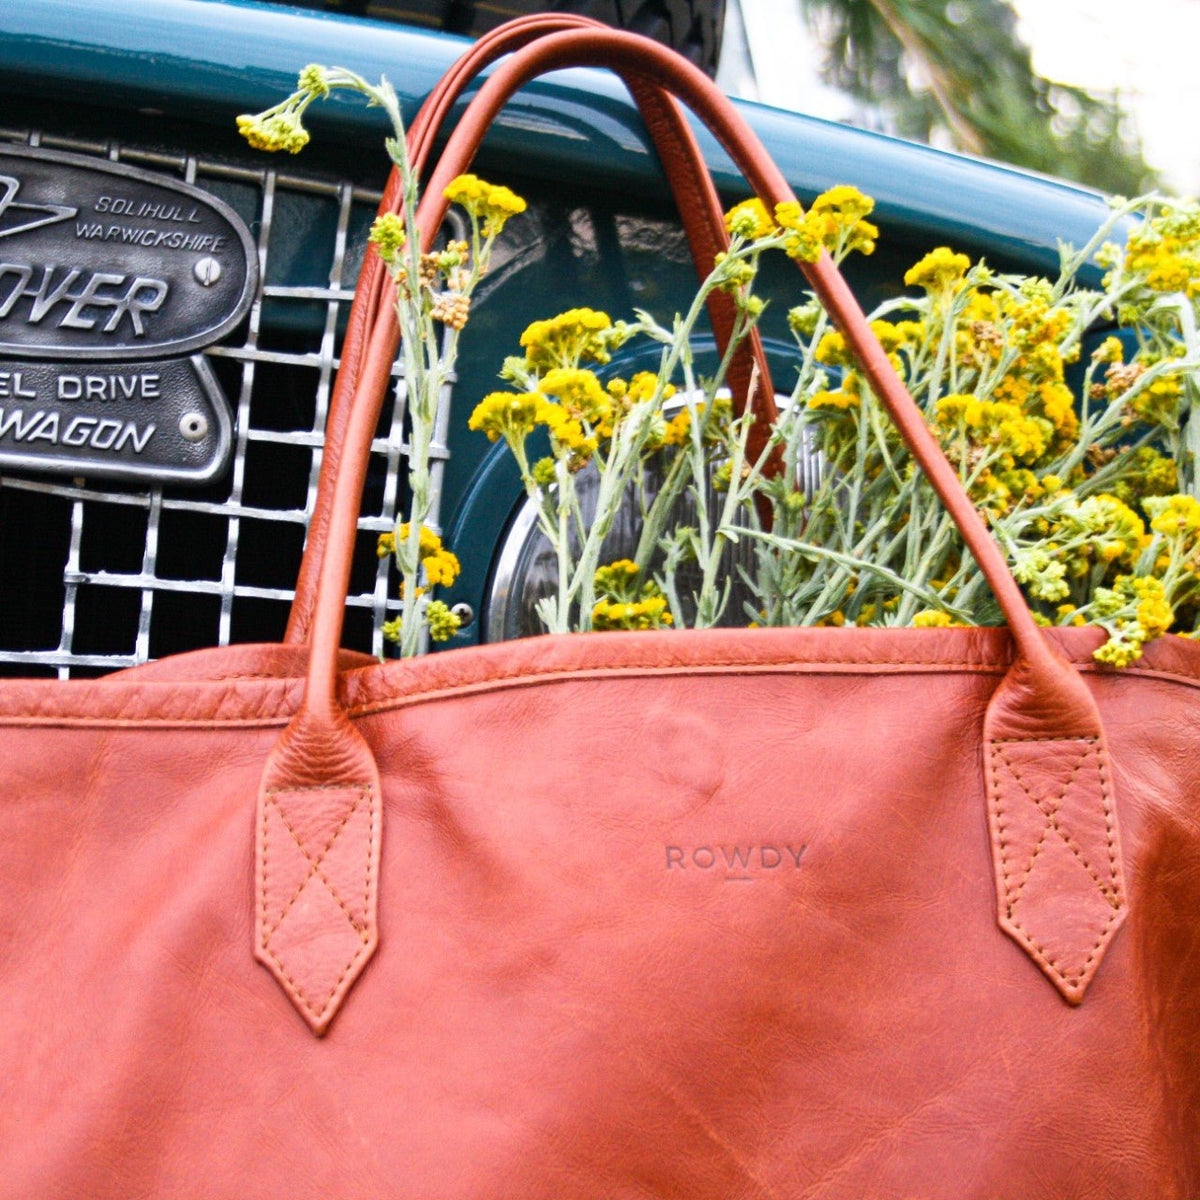 Rowdy Leather Tote Bag For Women, Russet Brown 'Maple', Soft & Natural Aniline Leather, Zipper Closure